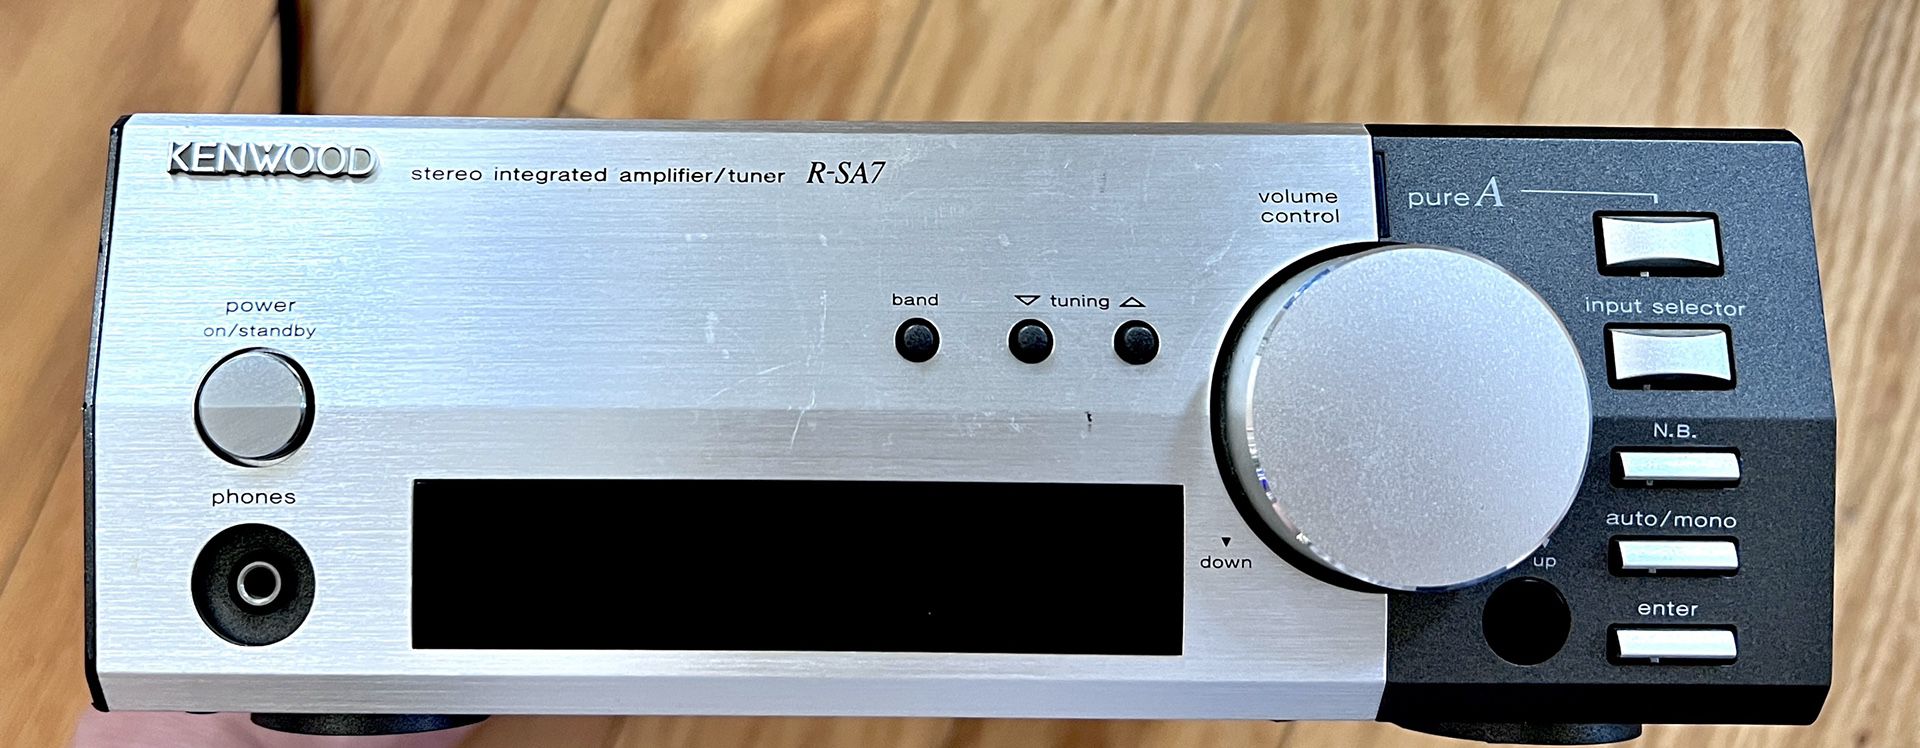 KENWOOD R-SA7 Receiver/CD Amplifier - Good Condition from Japan